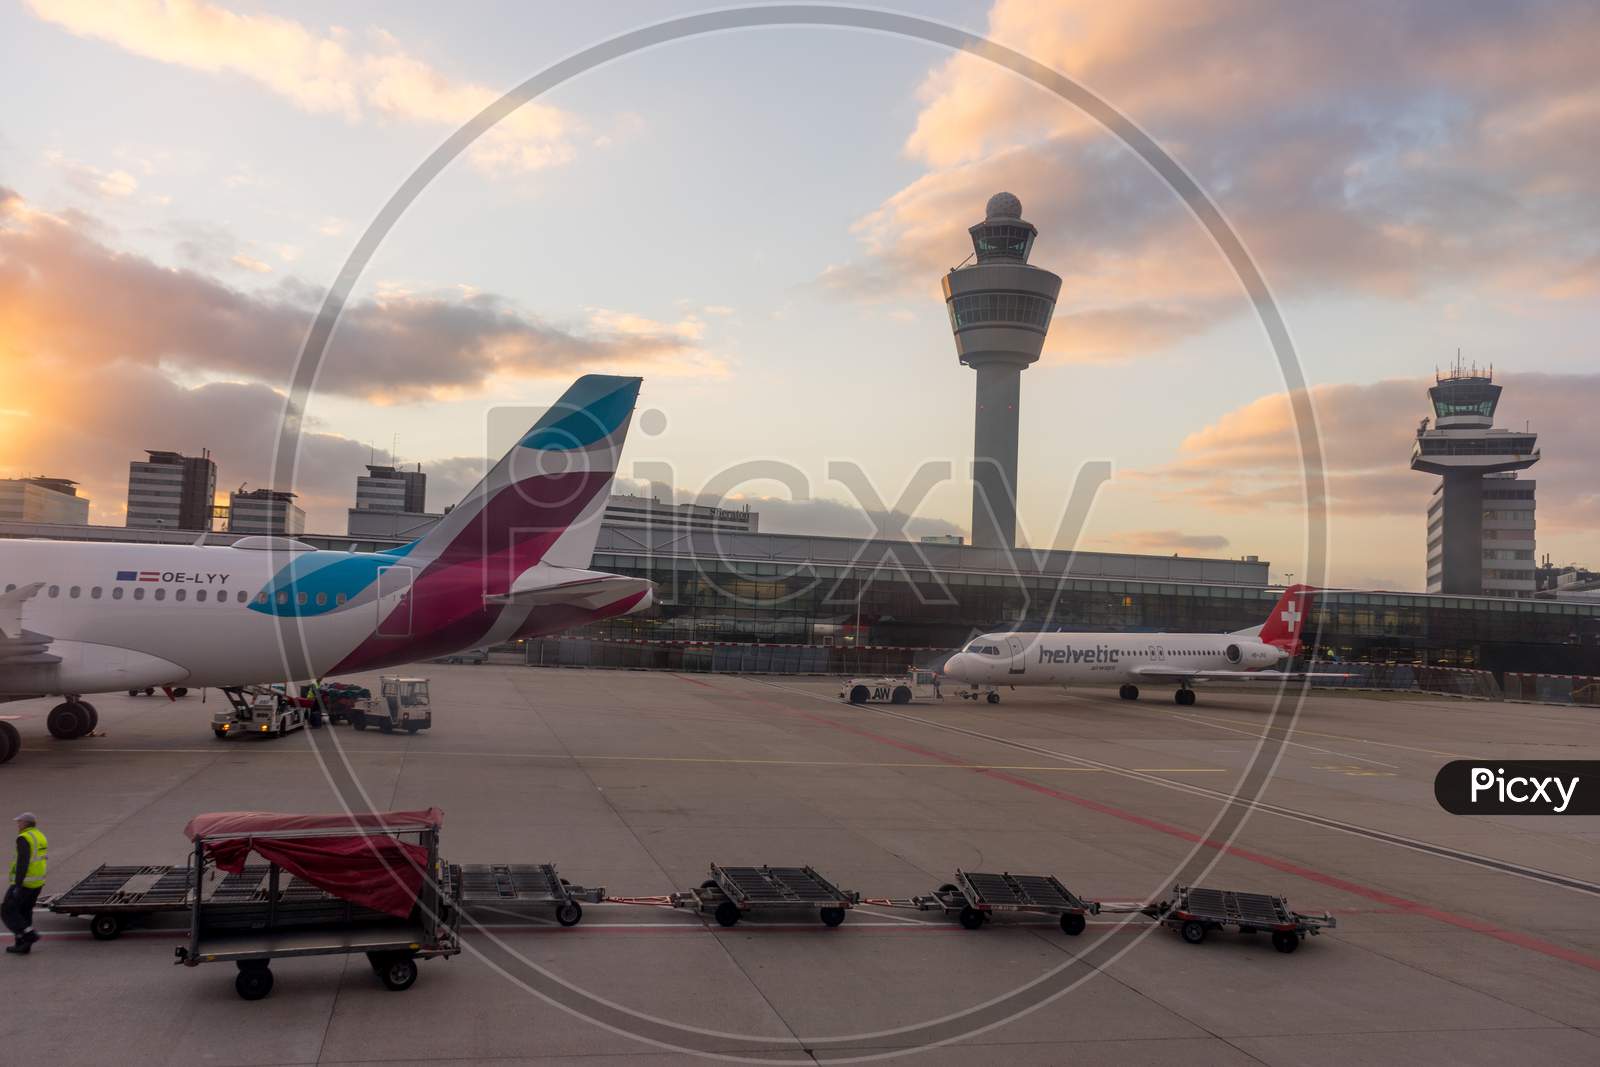 Amsterdam, Schiphol - 22 June 2018: Eurowings And Helvetic Airline Plane At The Schiphol Airport